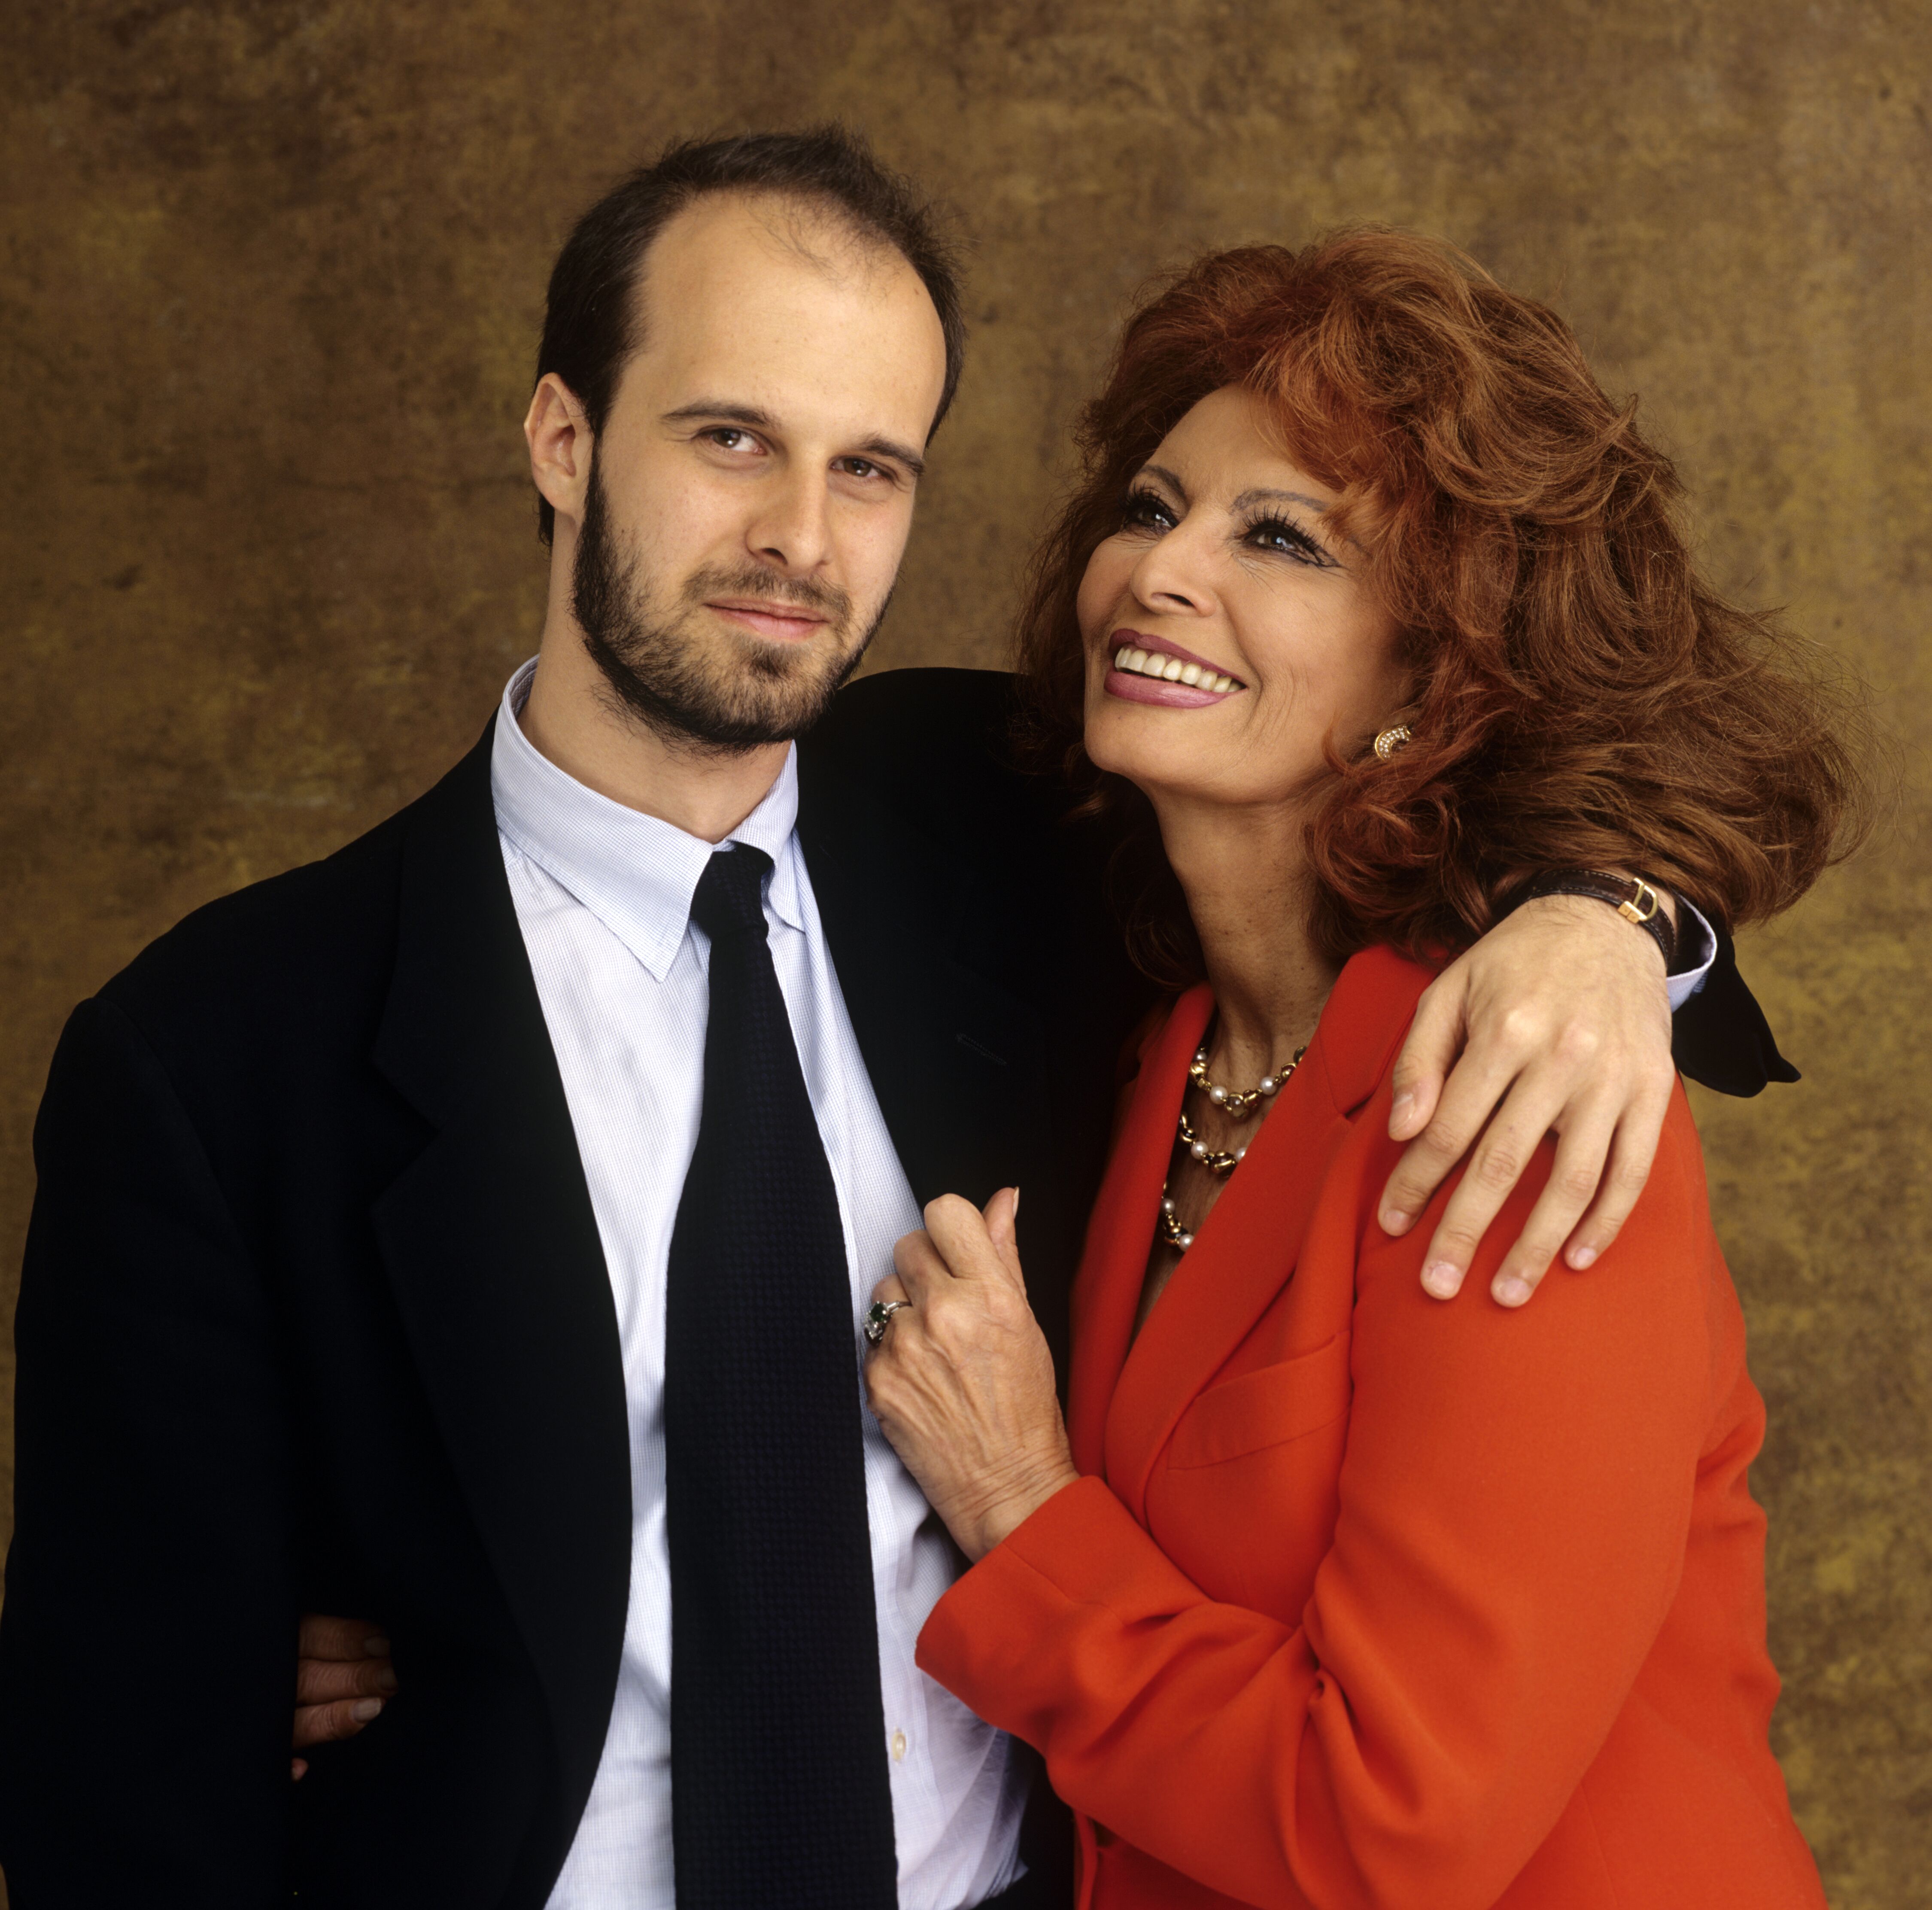 Sophia Loren and youngest son, Edoardo Ponti pose for a photo on May 30, 2001 in Toronto, Canada | Source: Getty Images